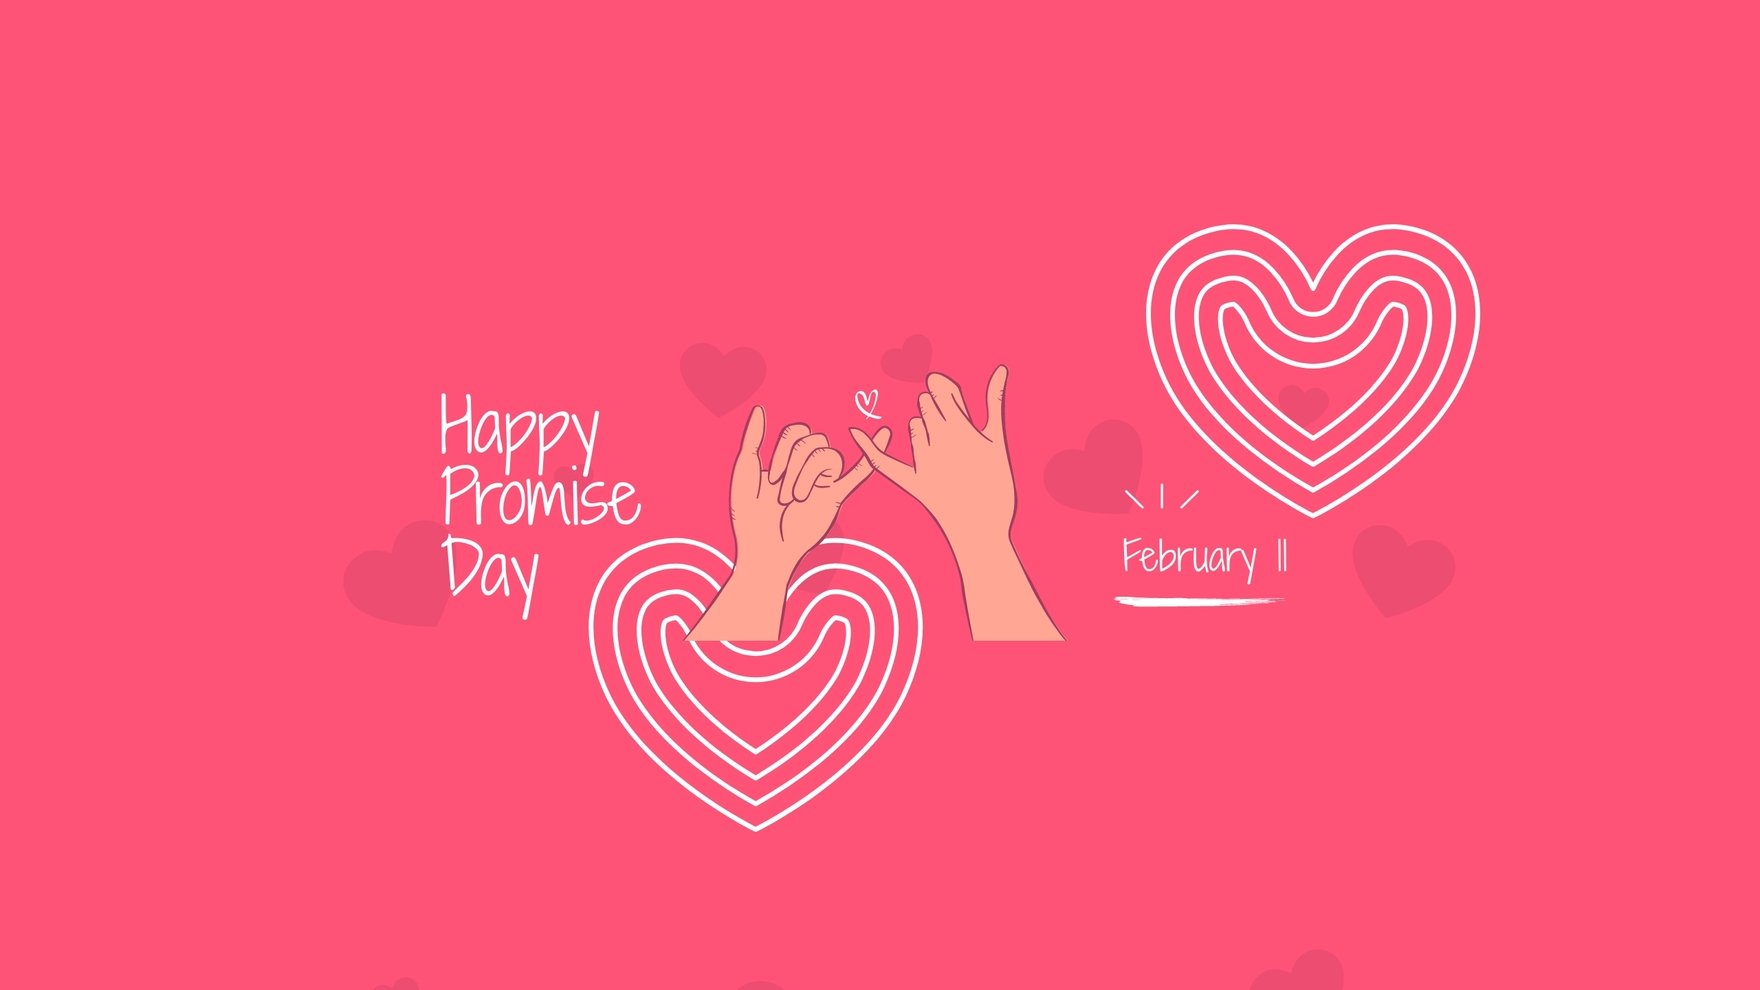 Happy Promise Day Youtube Banner